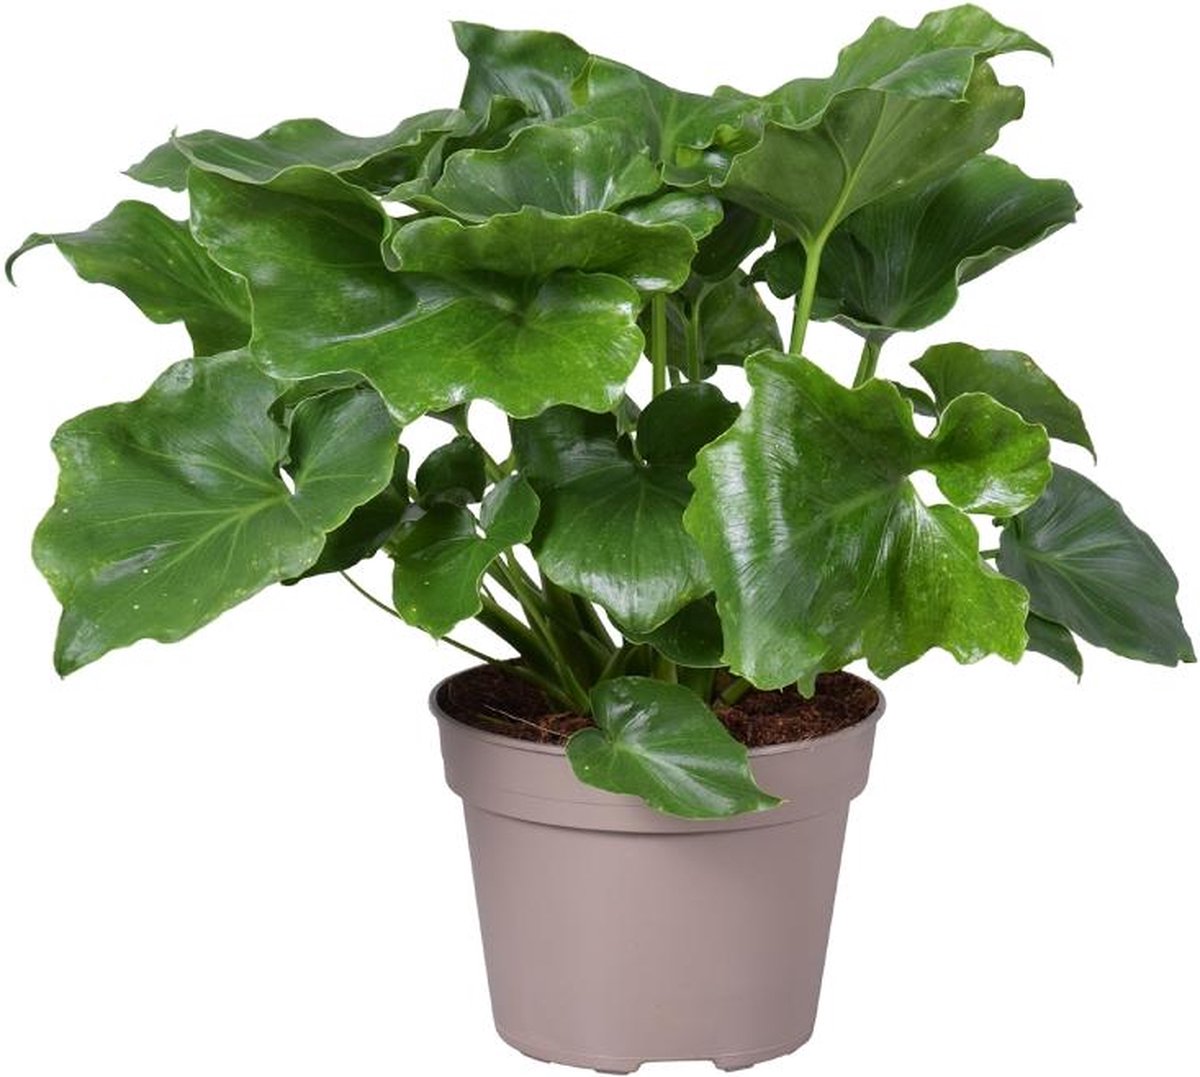 BOTANICLY Groene plant – Philodendron (Philodendron selloum) – Hoogte: 40 cm – van